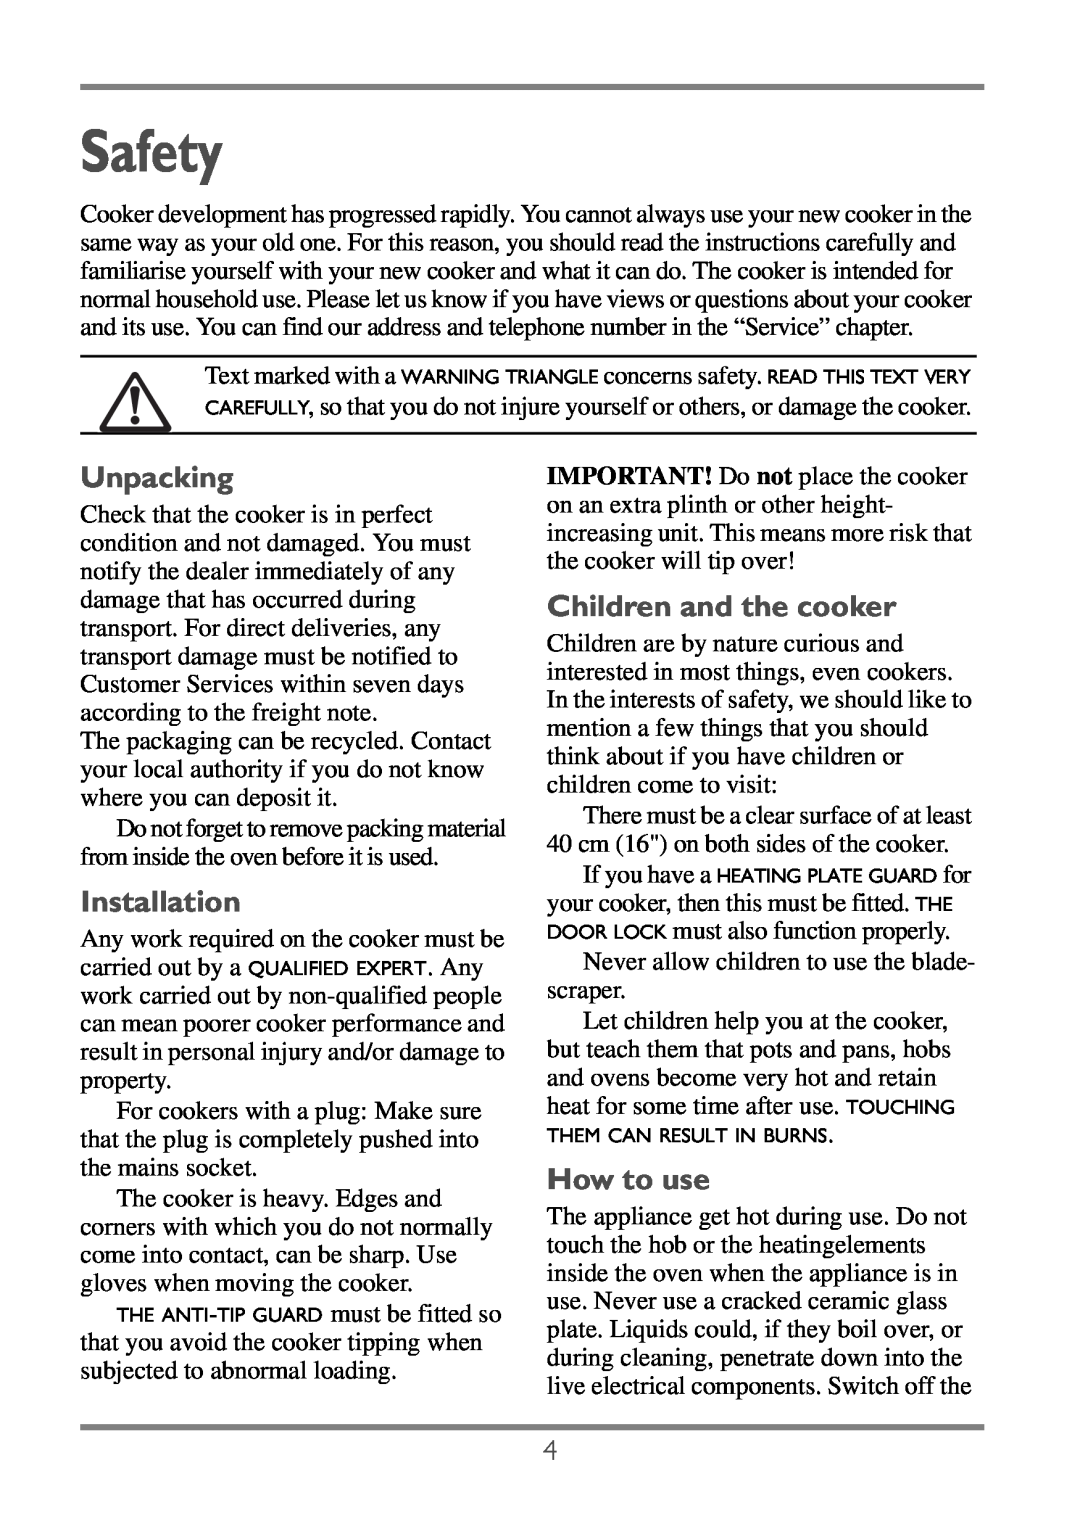 Electrolux EKC60752 user manual Safety, Unpacking, Installation, Children and the cooker, How to use 